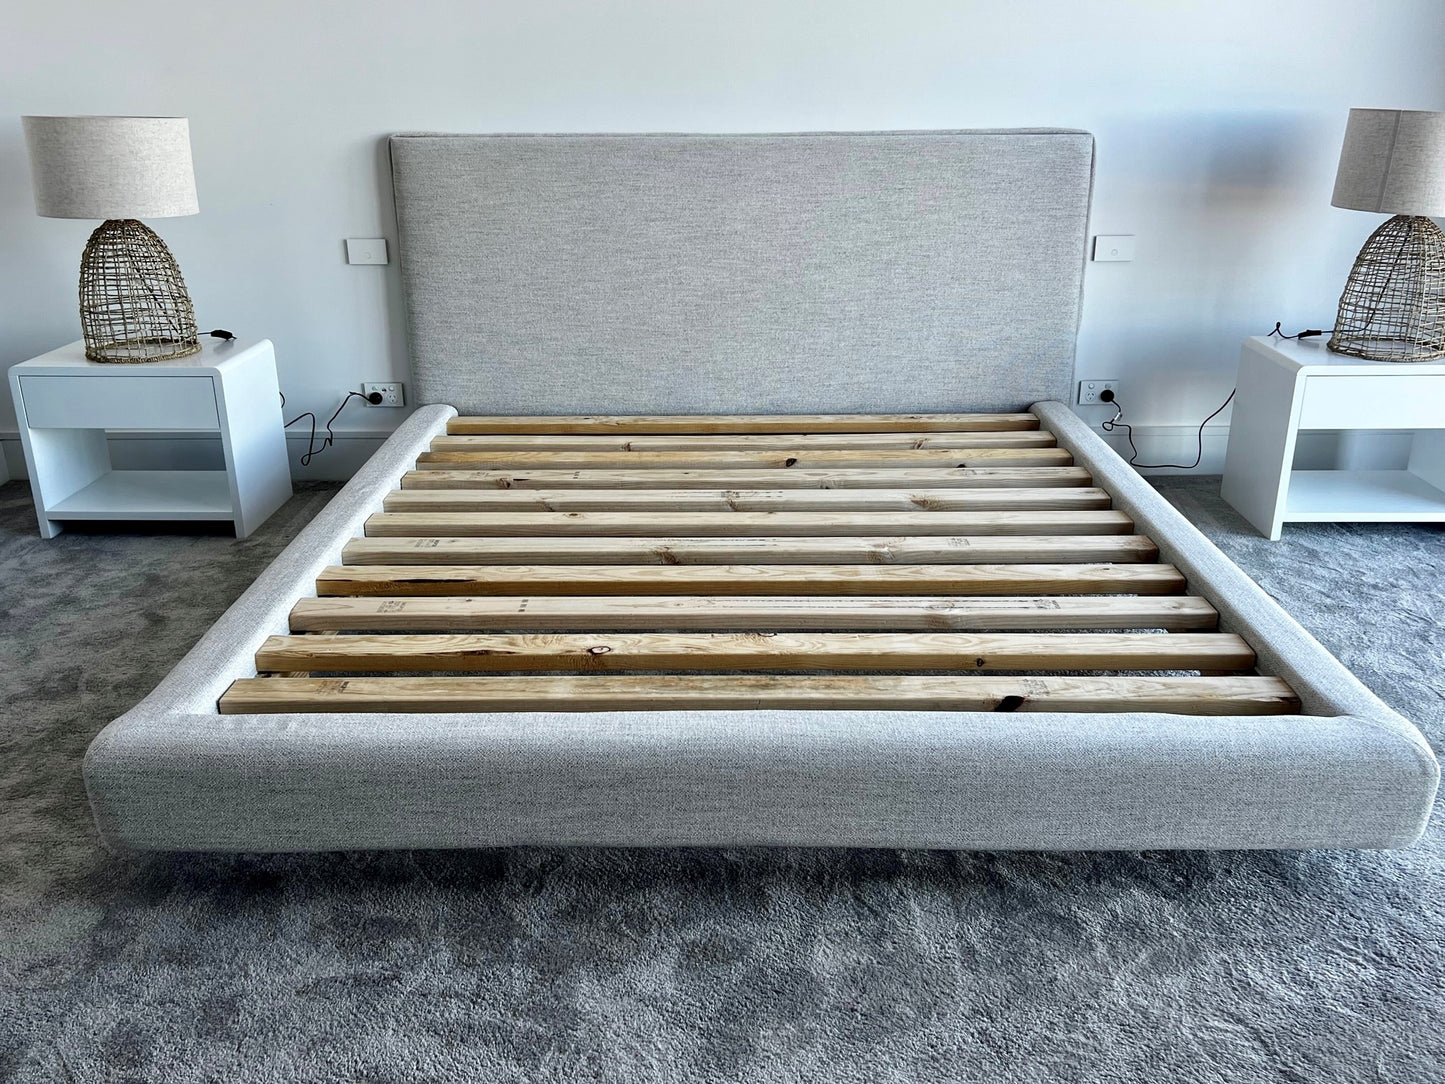 Souk Bed by furnish.